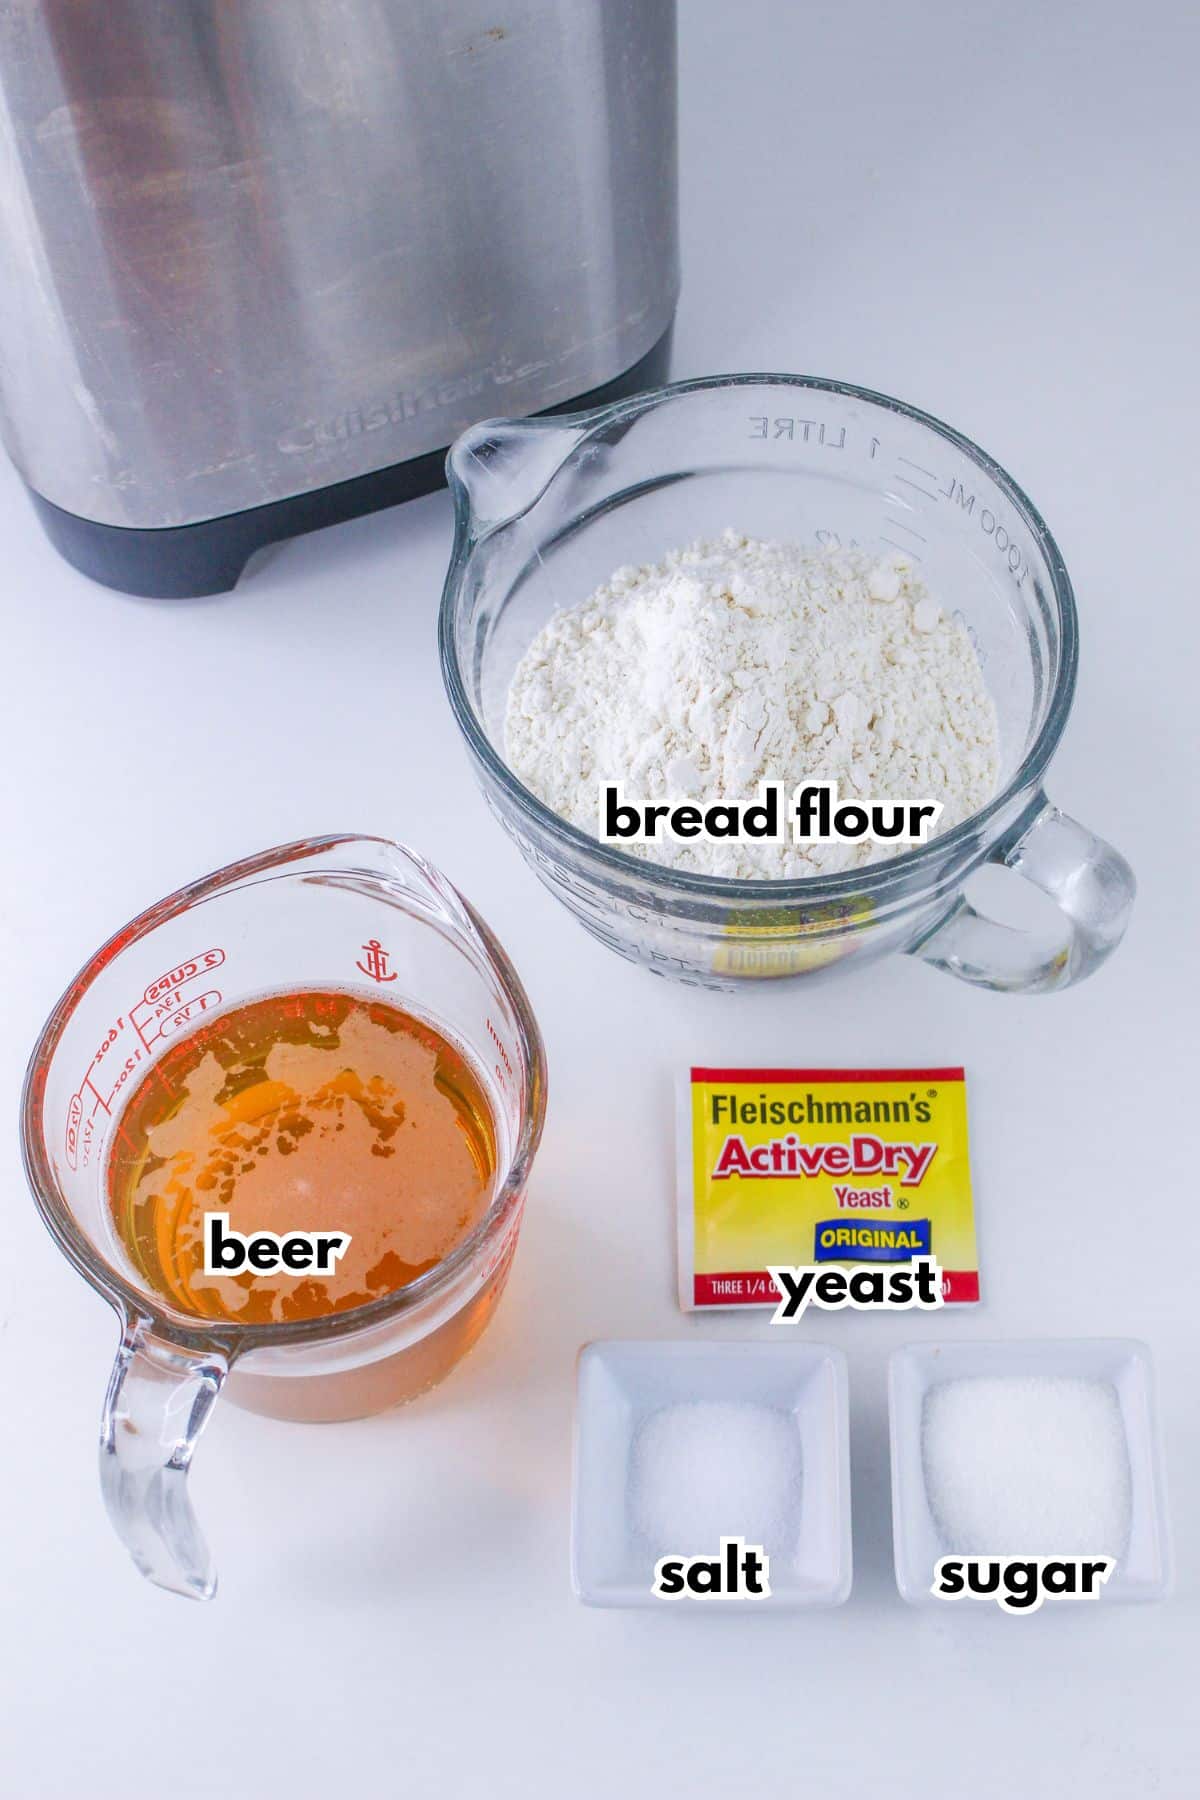 bowls of bread flour, warm beer, a packet of yeast, salt and sugar.